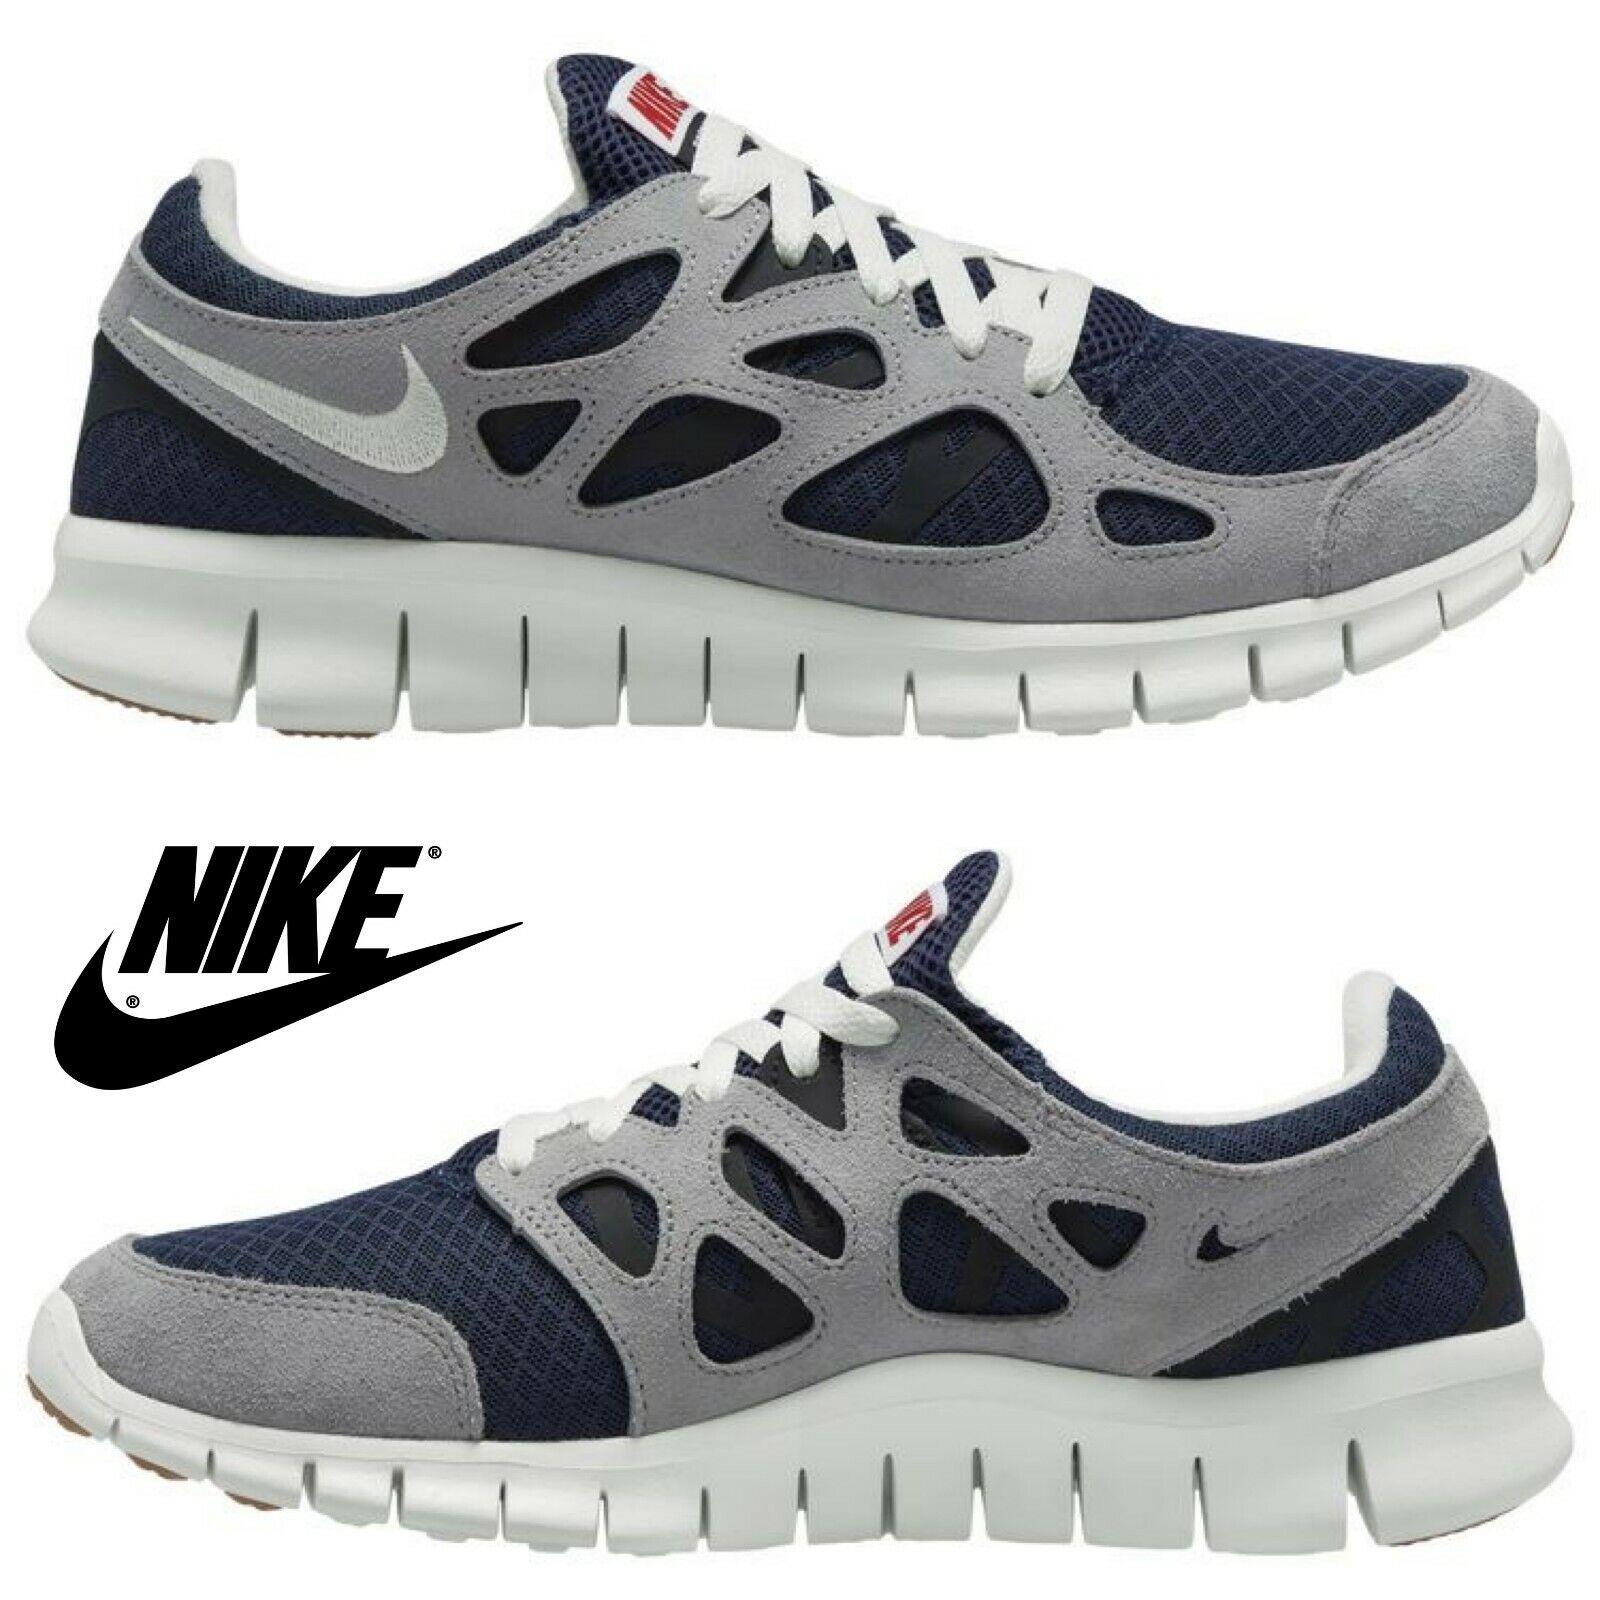 Nike Men`s Free Run 2 Shoes Running Training Athletic Sport Casual Sneakers Navy